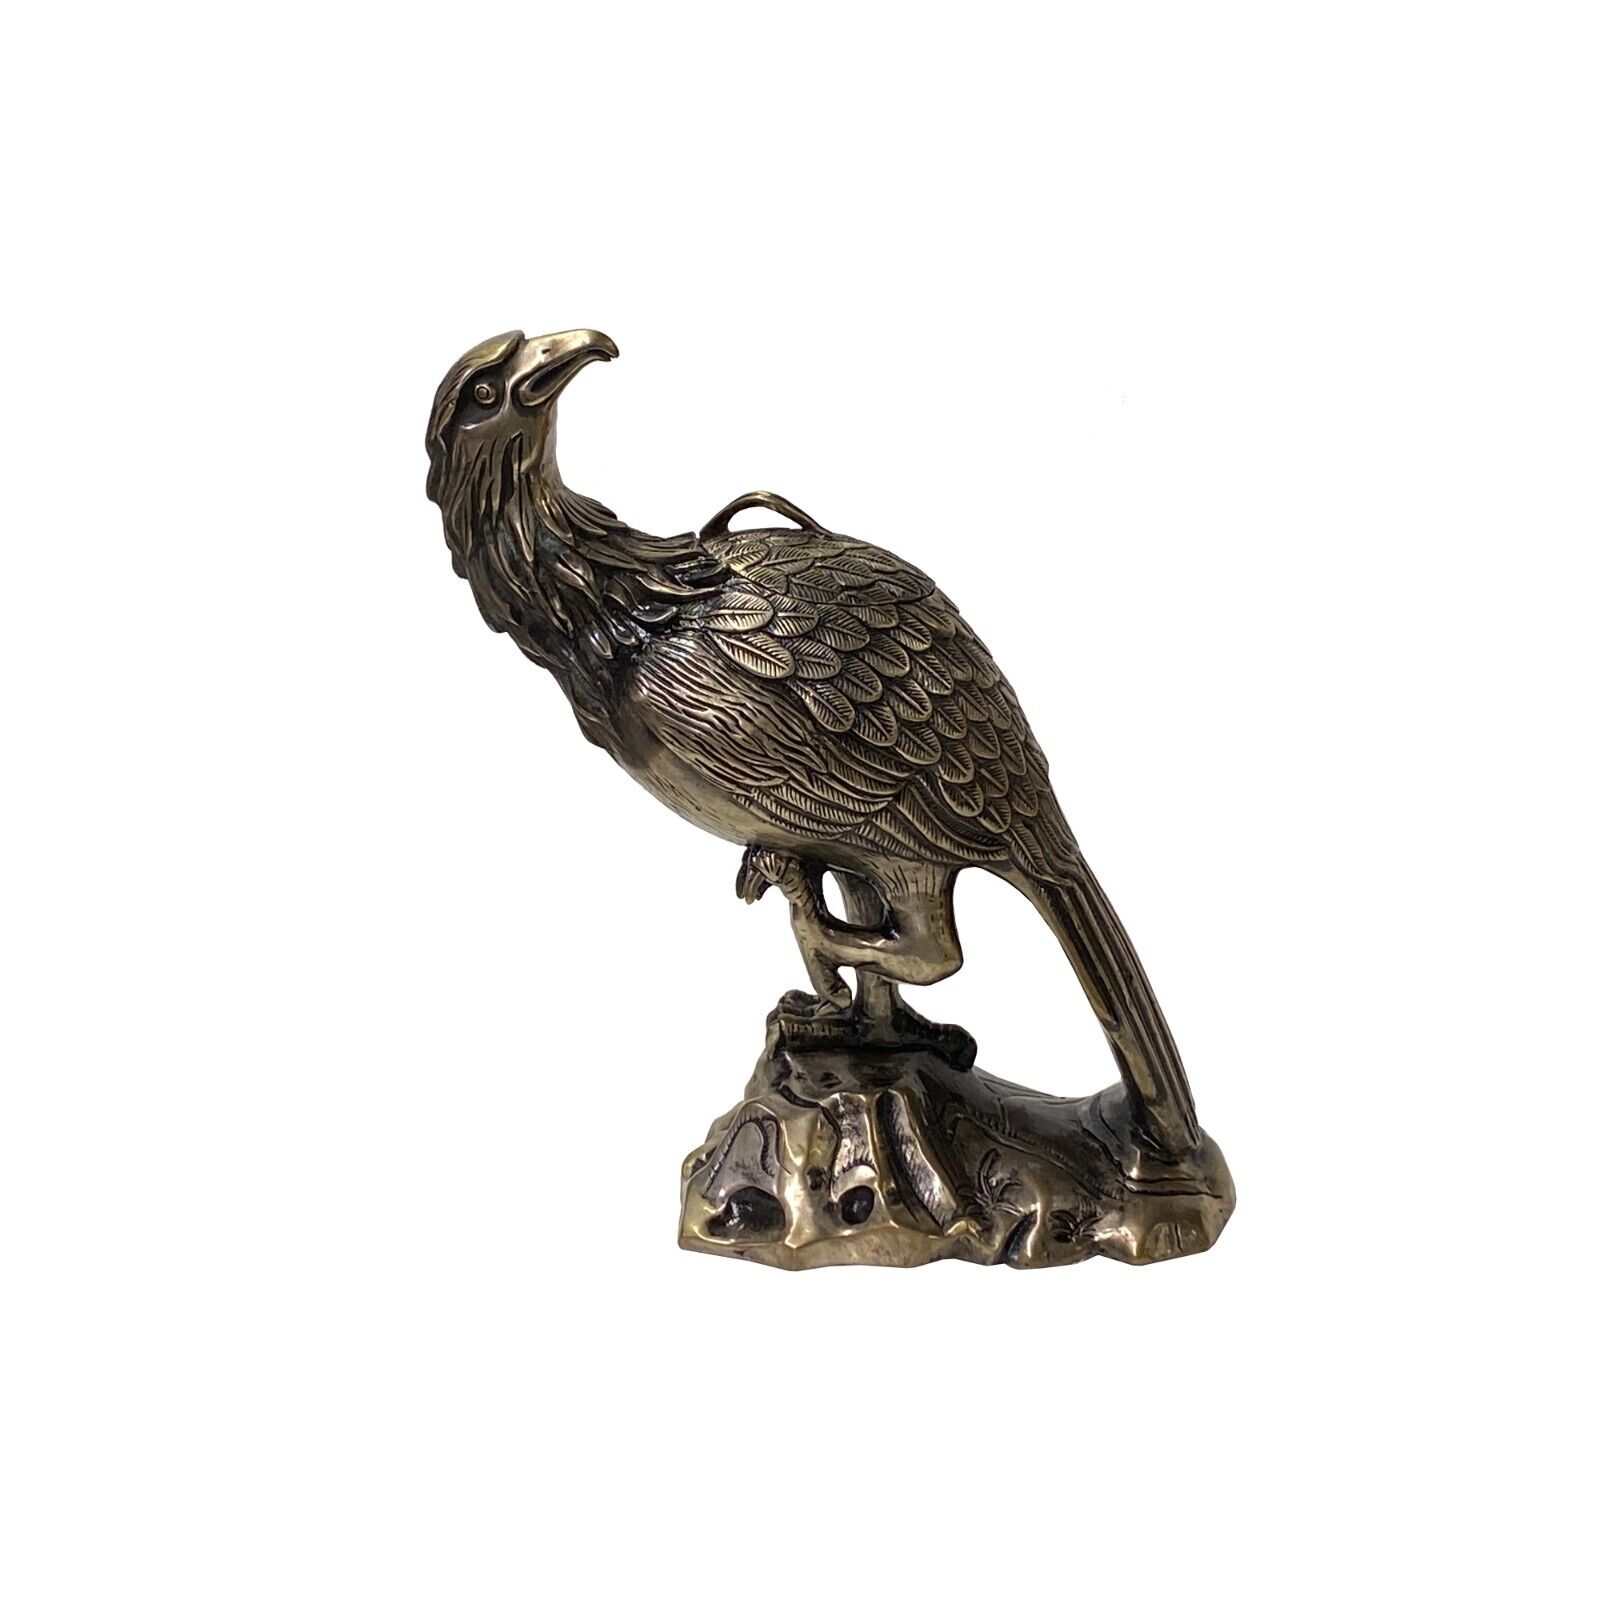 Handmade Detail Chinese Silver Coating Metal Eagle On Rock Figure ws3768